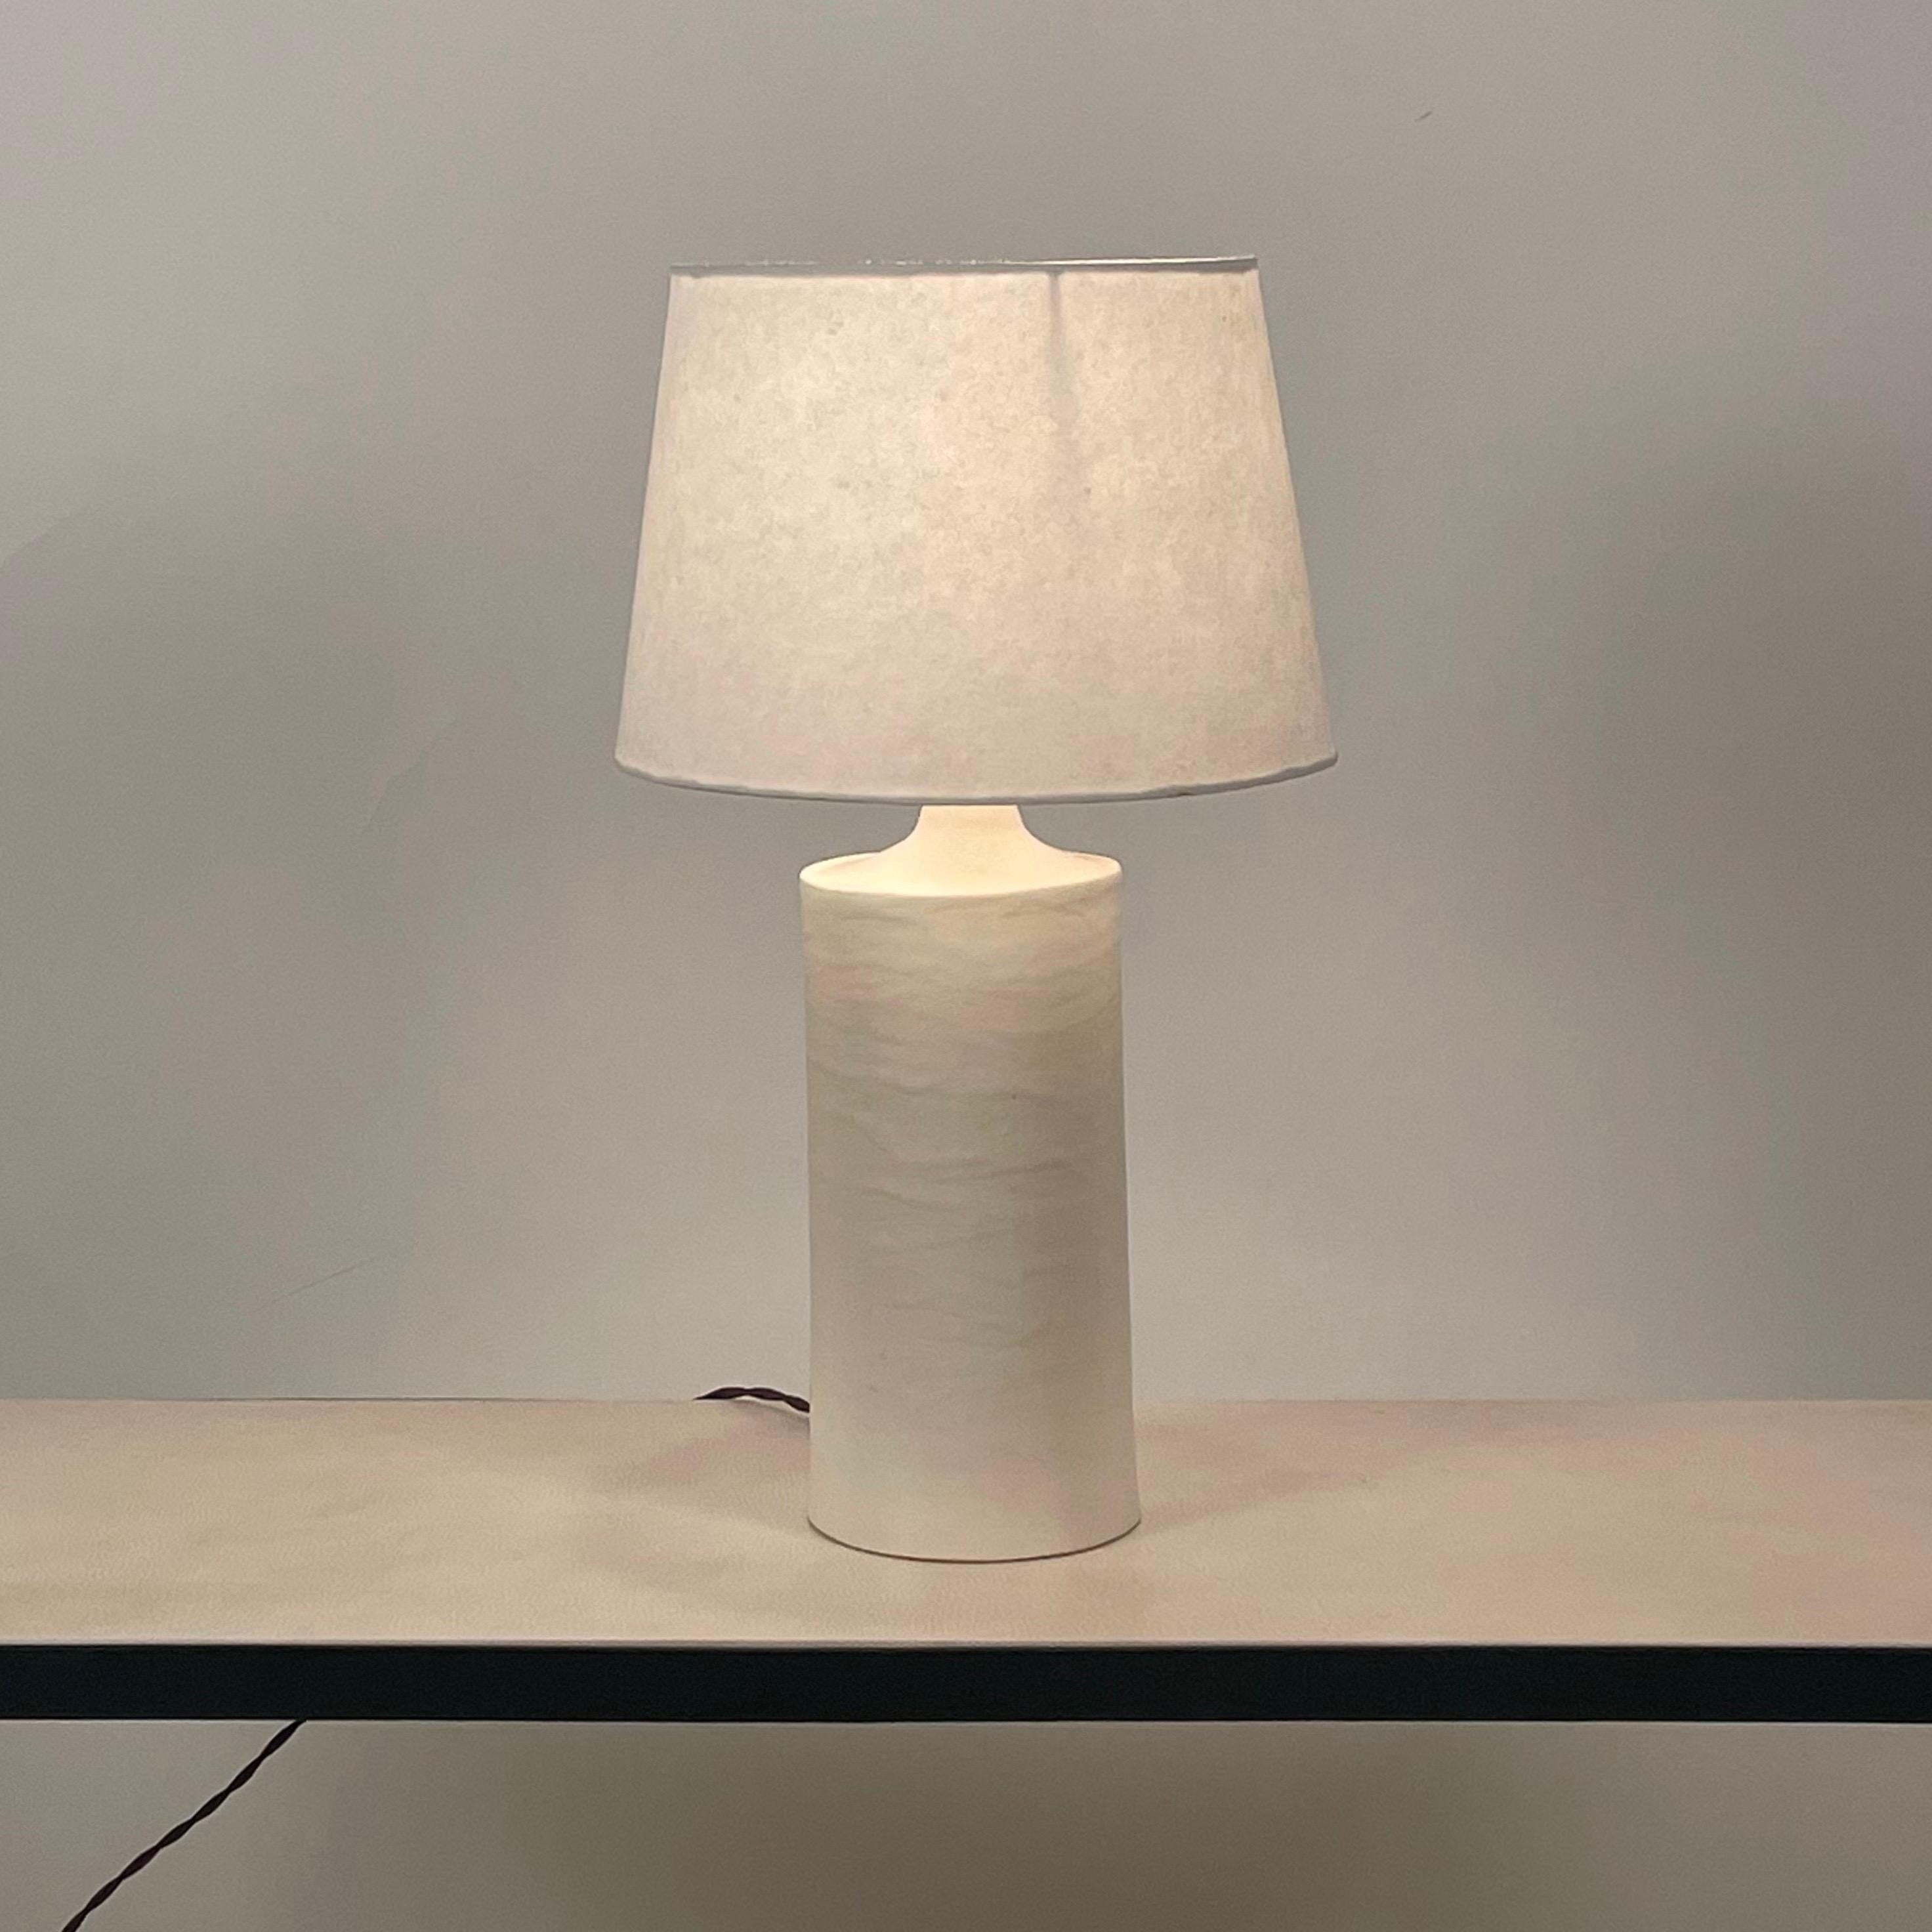 Great as bedside lamps or where a small, understated pair of lamps is desired.

Dimensions listed are the overall dimensions of the lamps with the shades.

The shades are 10 in. bottom diameter x 8 in. top diameter x 7 in. tall.